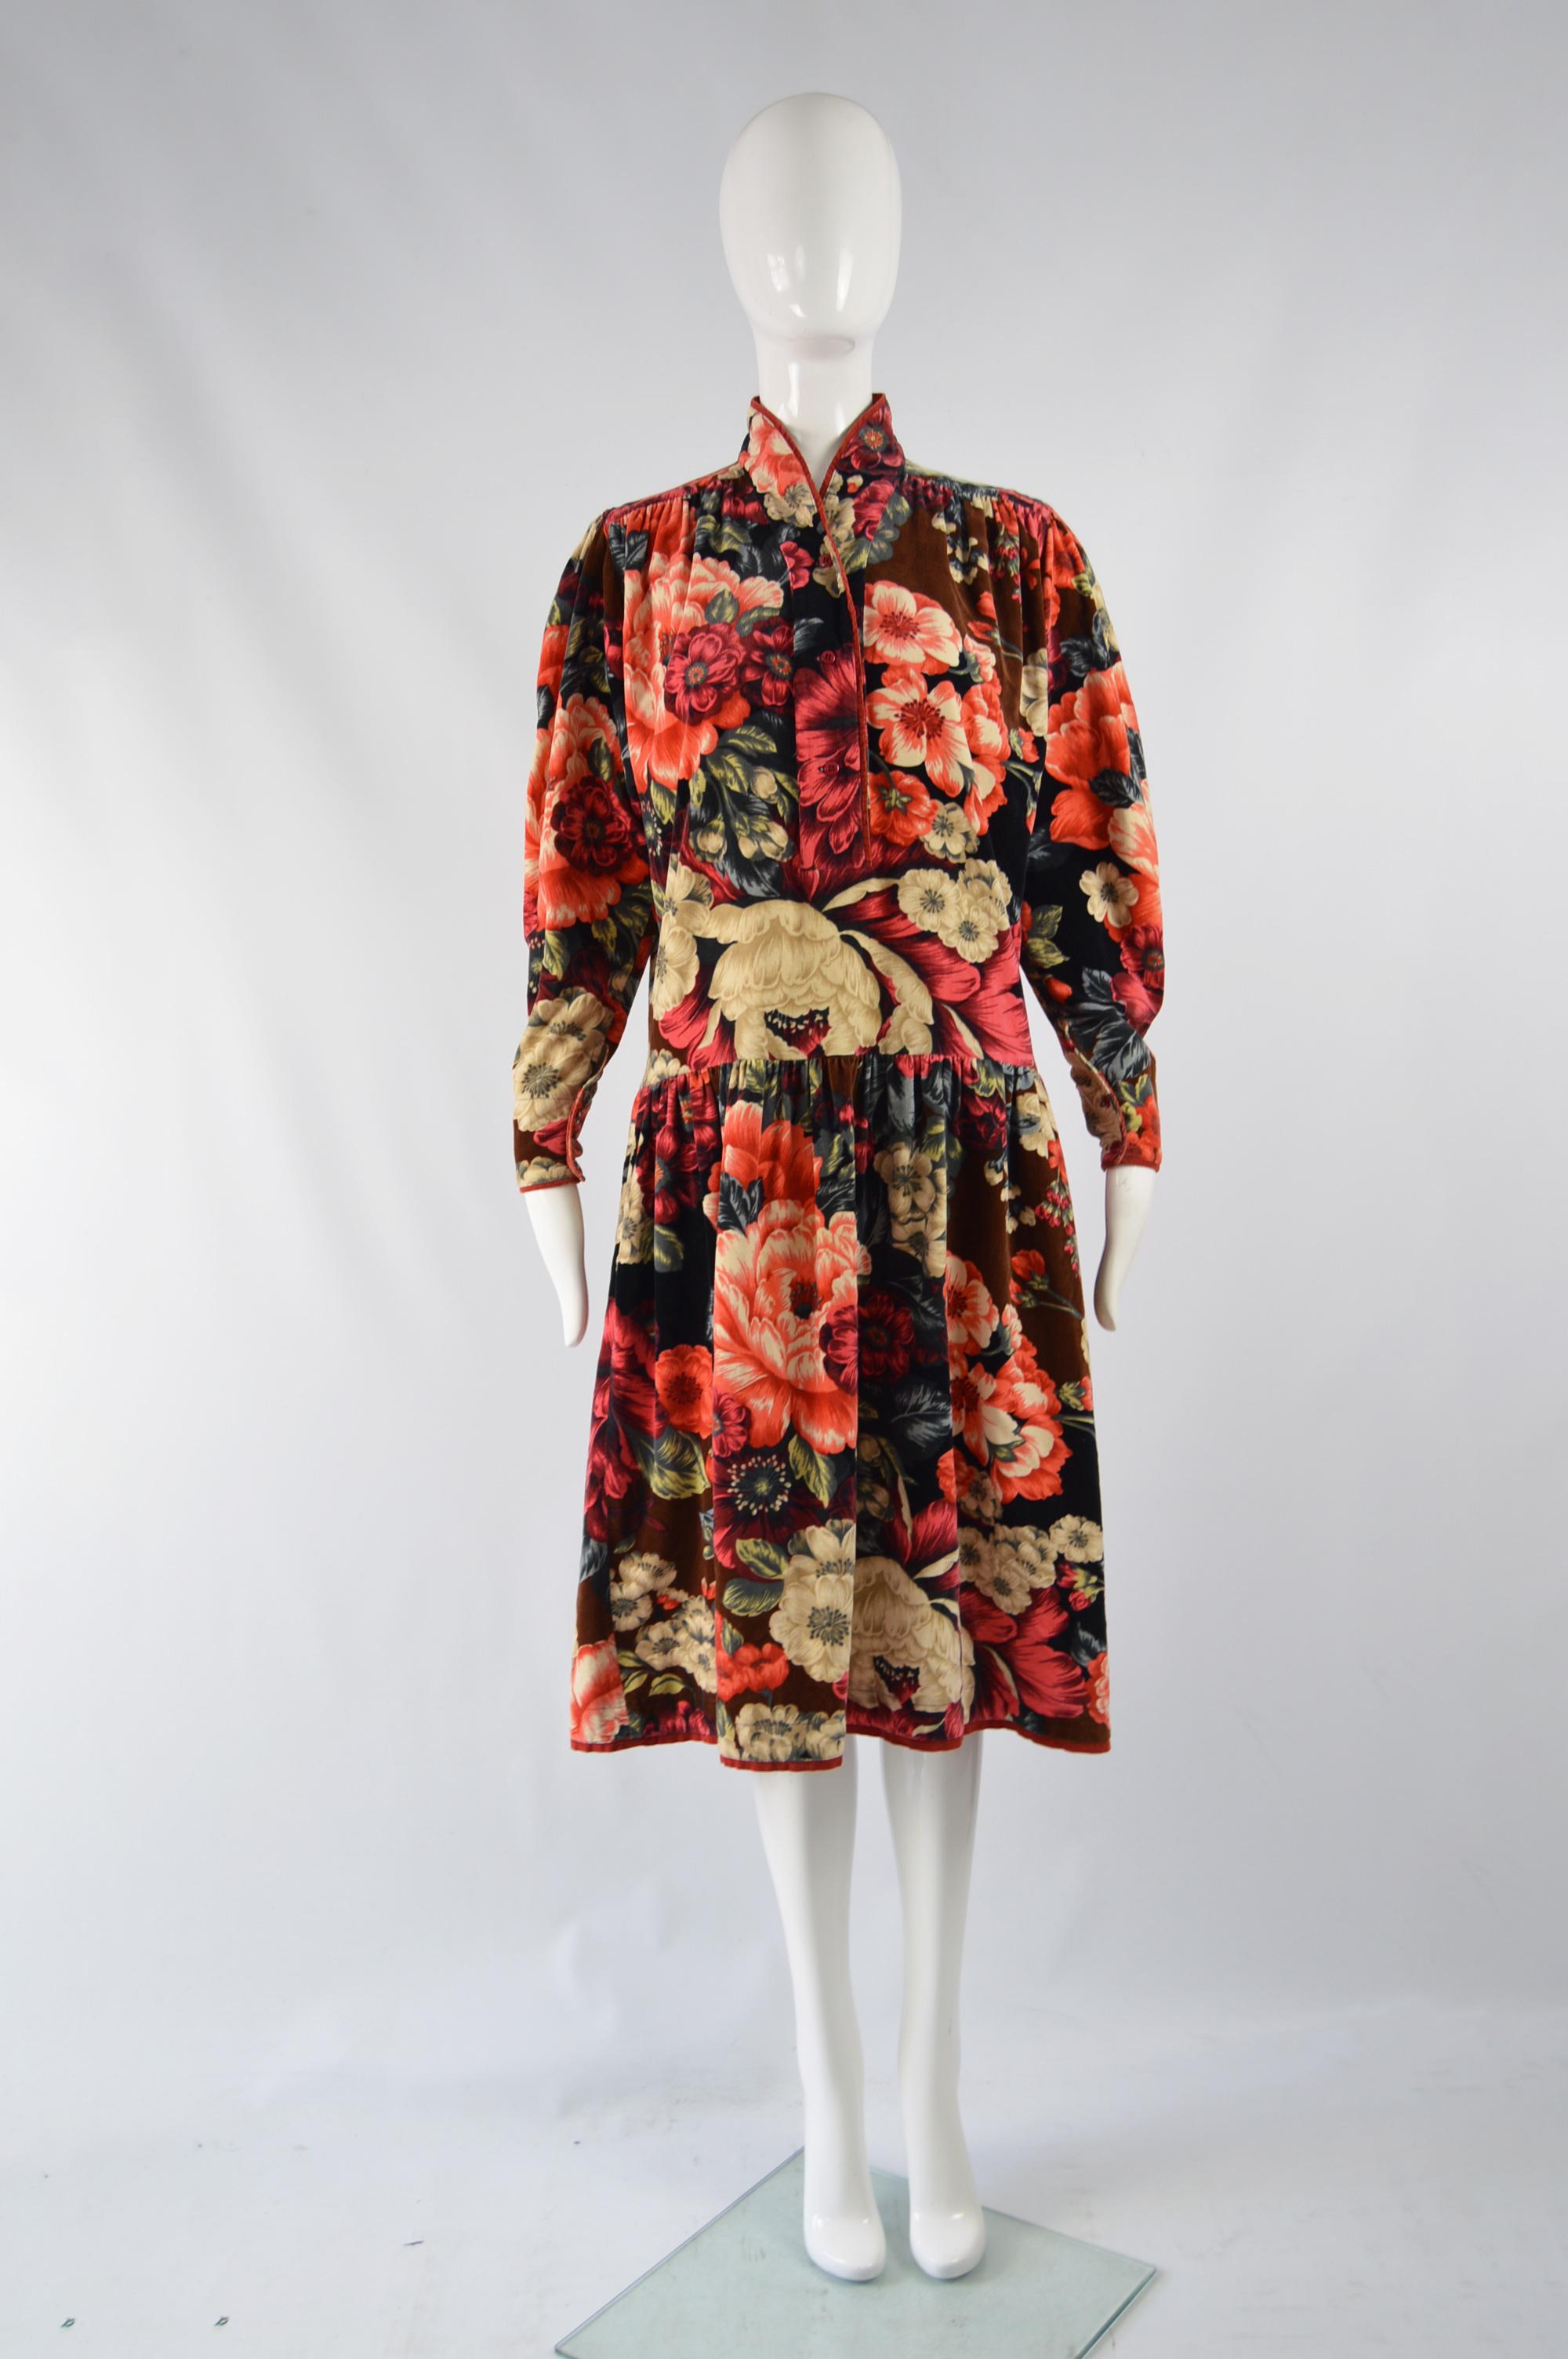 A beautiful vintage womens boho oversized dress from the 70s by iconic fashion designer, Kenzo. In a black, boldly floral printed velvet with a red corduroy trim, dropped waist and puff sleeves. 

Size: Marked M but it is meant to have an oversized